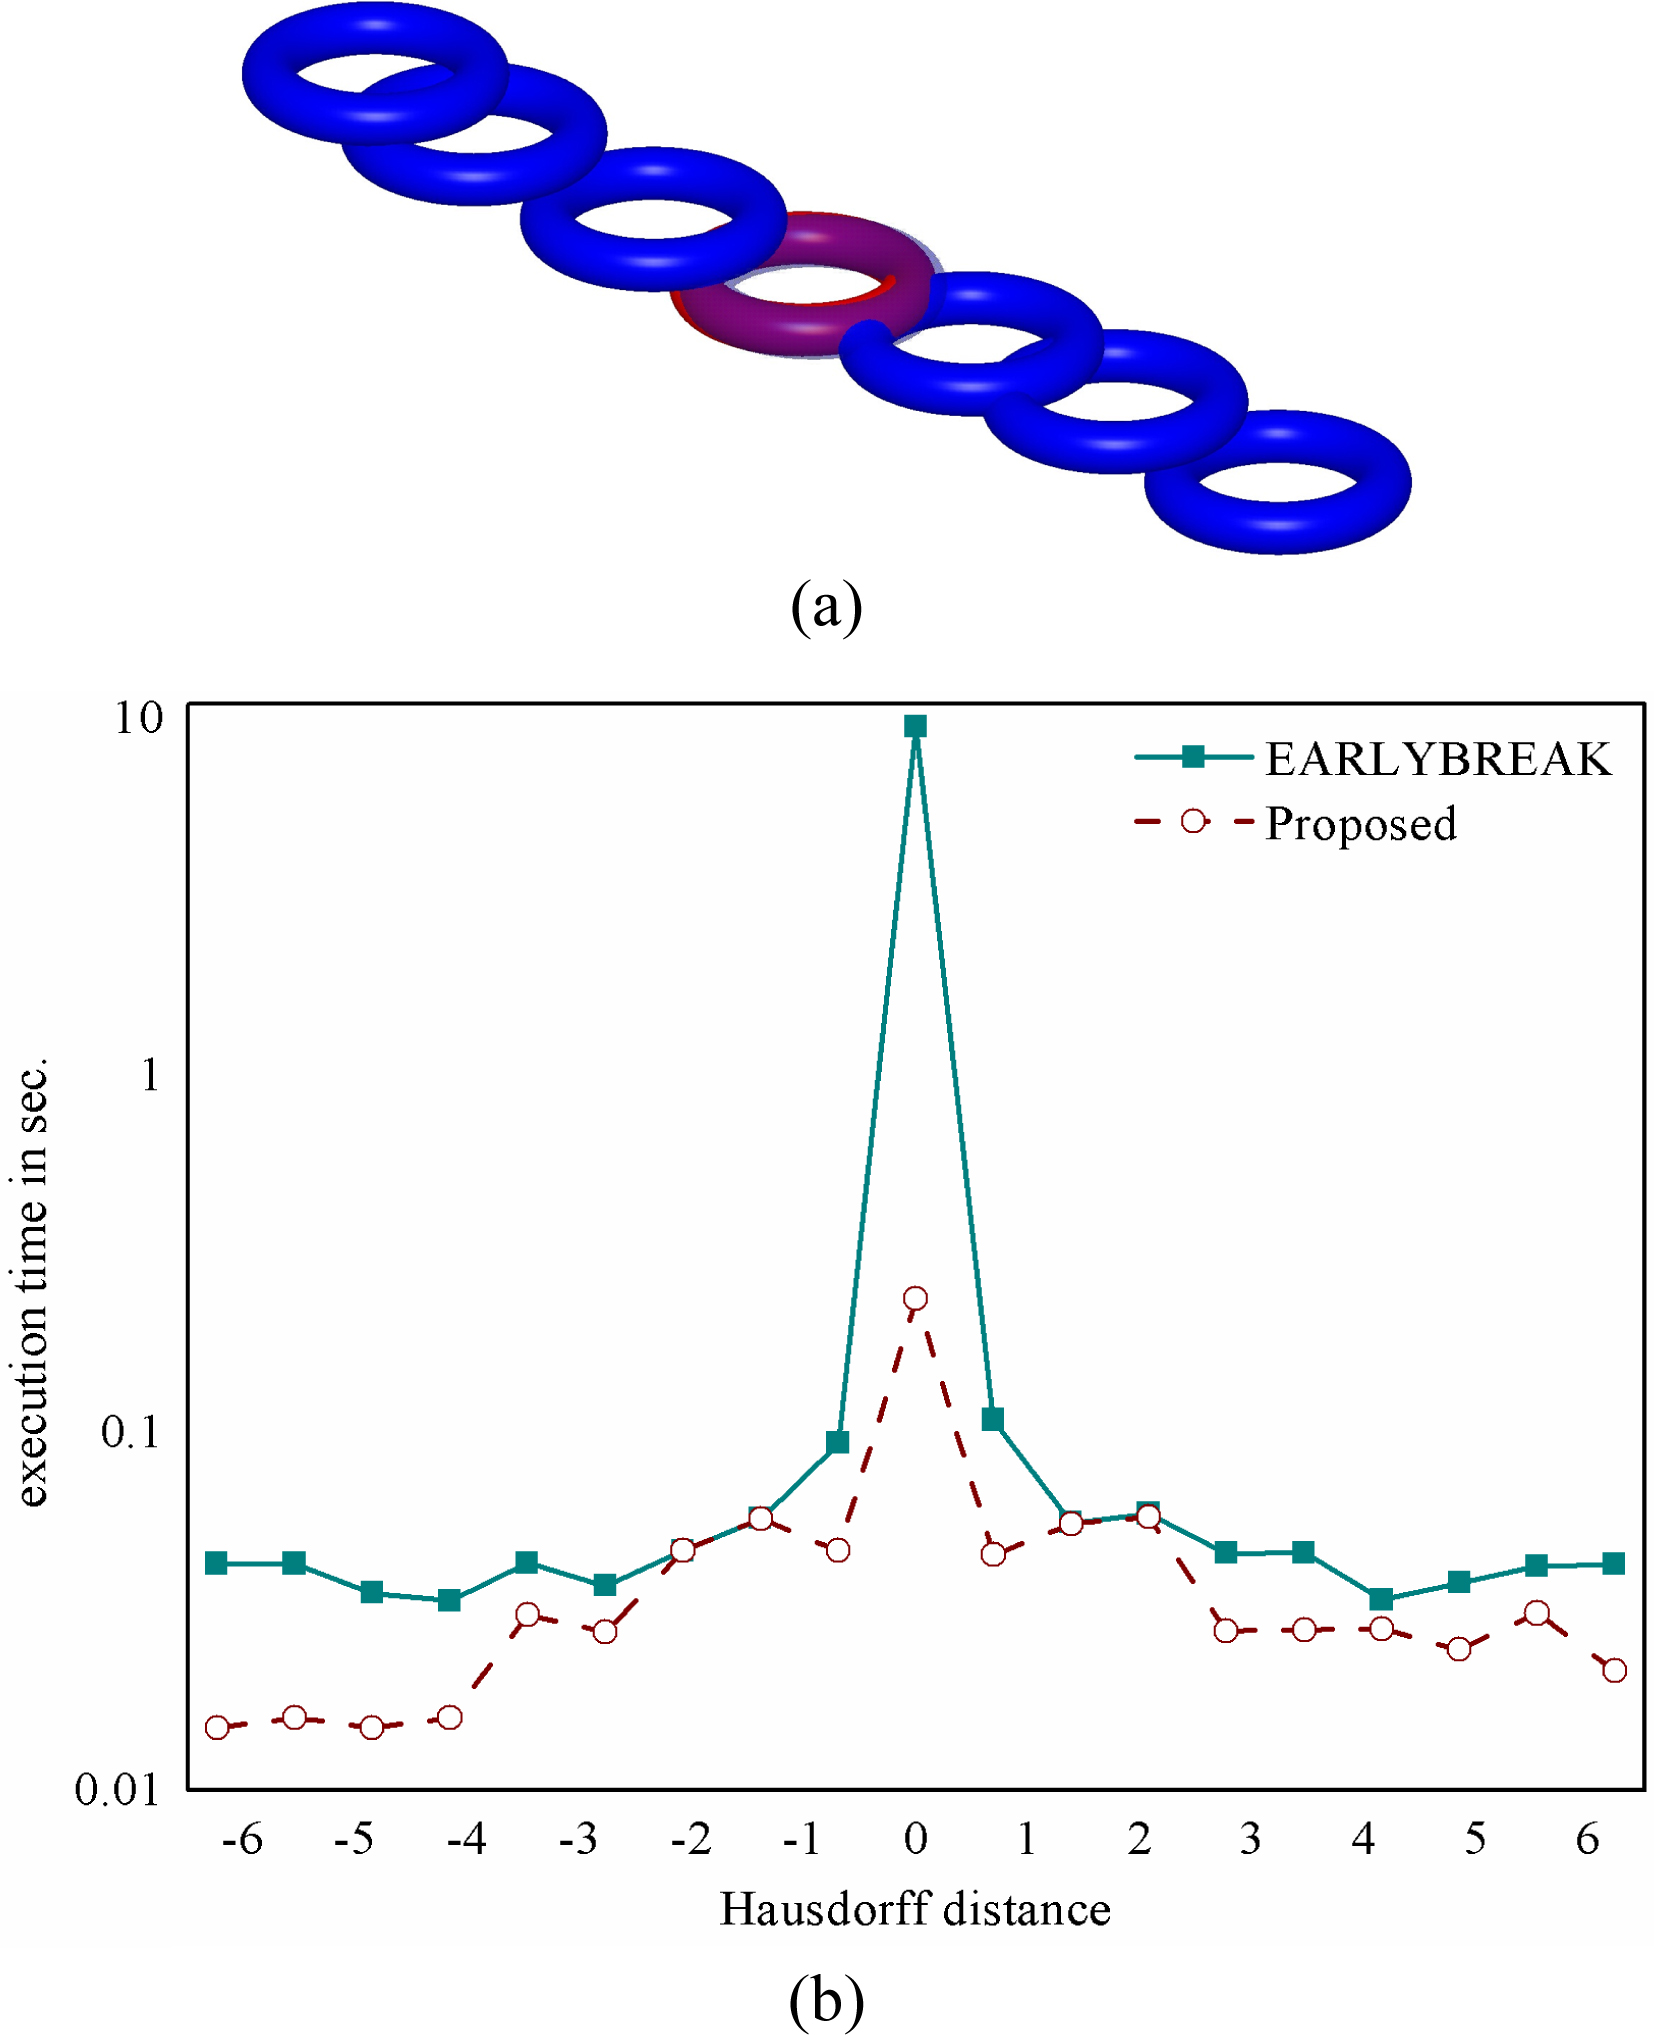 HD computation between a stationary torus and a moving torus. (a) One torus is moving under a continuous translation. (b) Comparison of the execution time between the proposed algorithm and the EARLYBREAK algorithm.